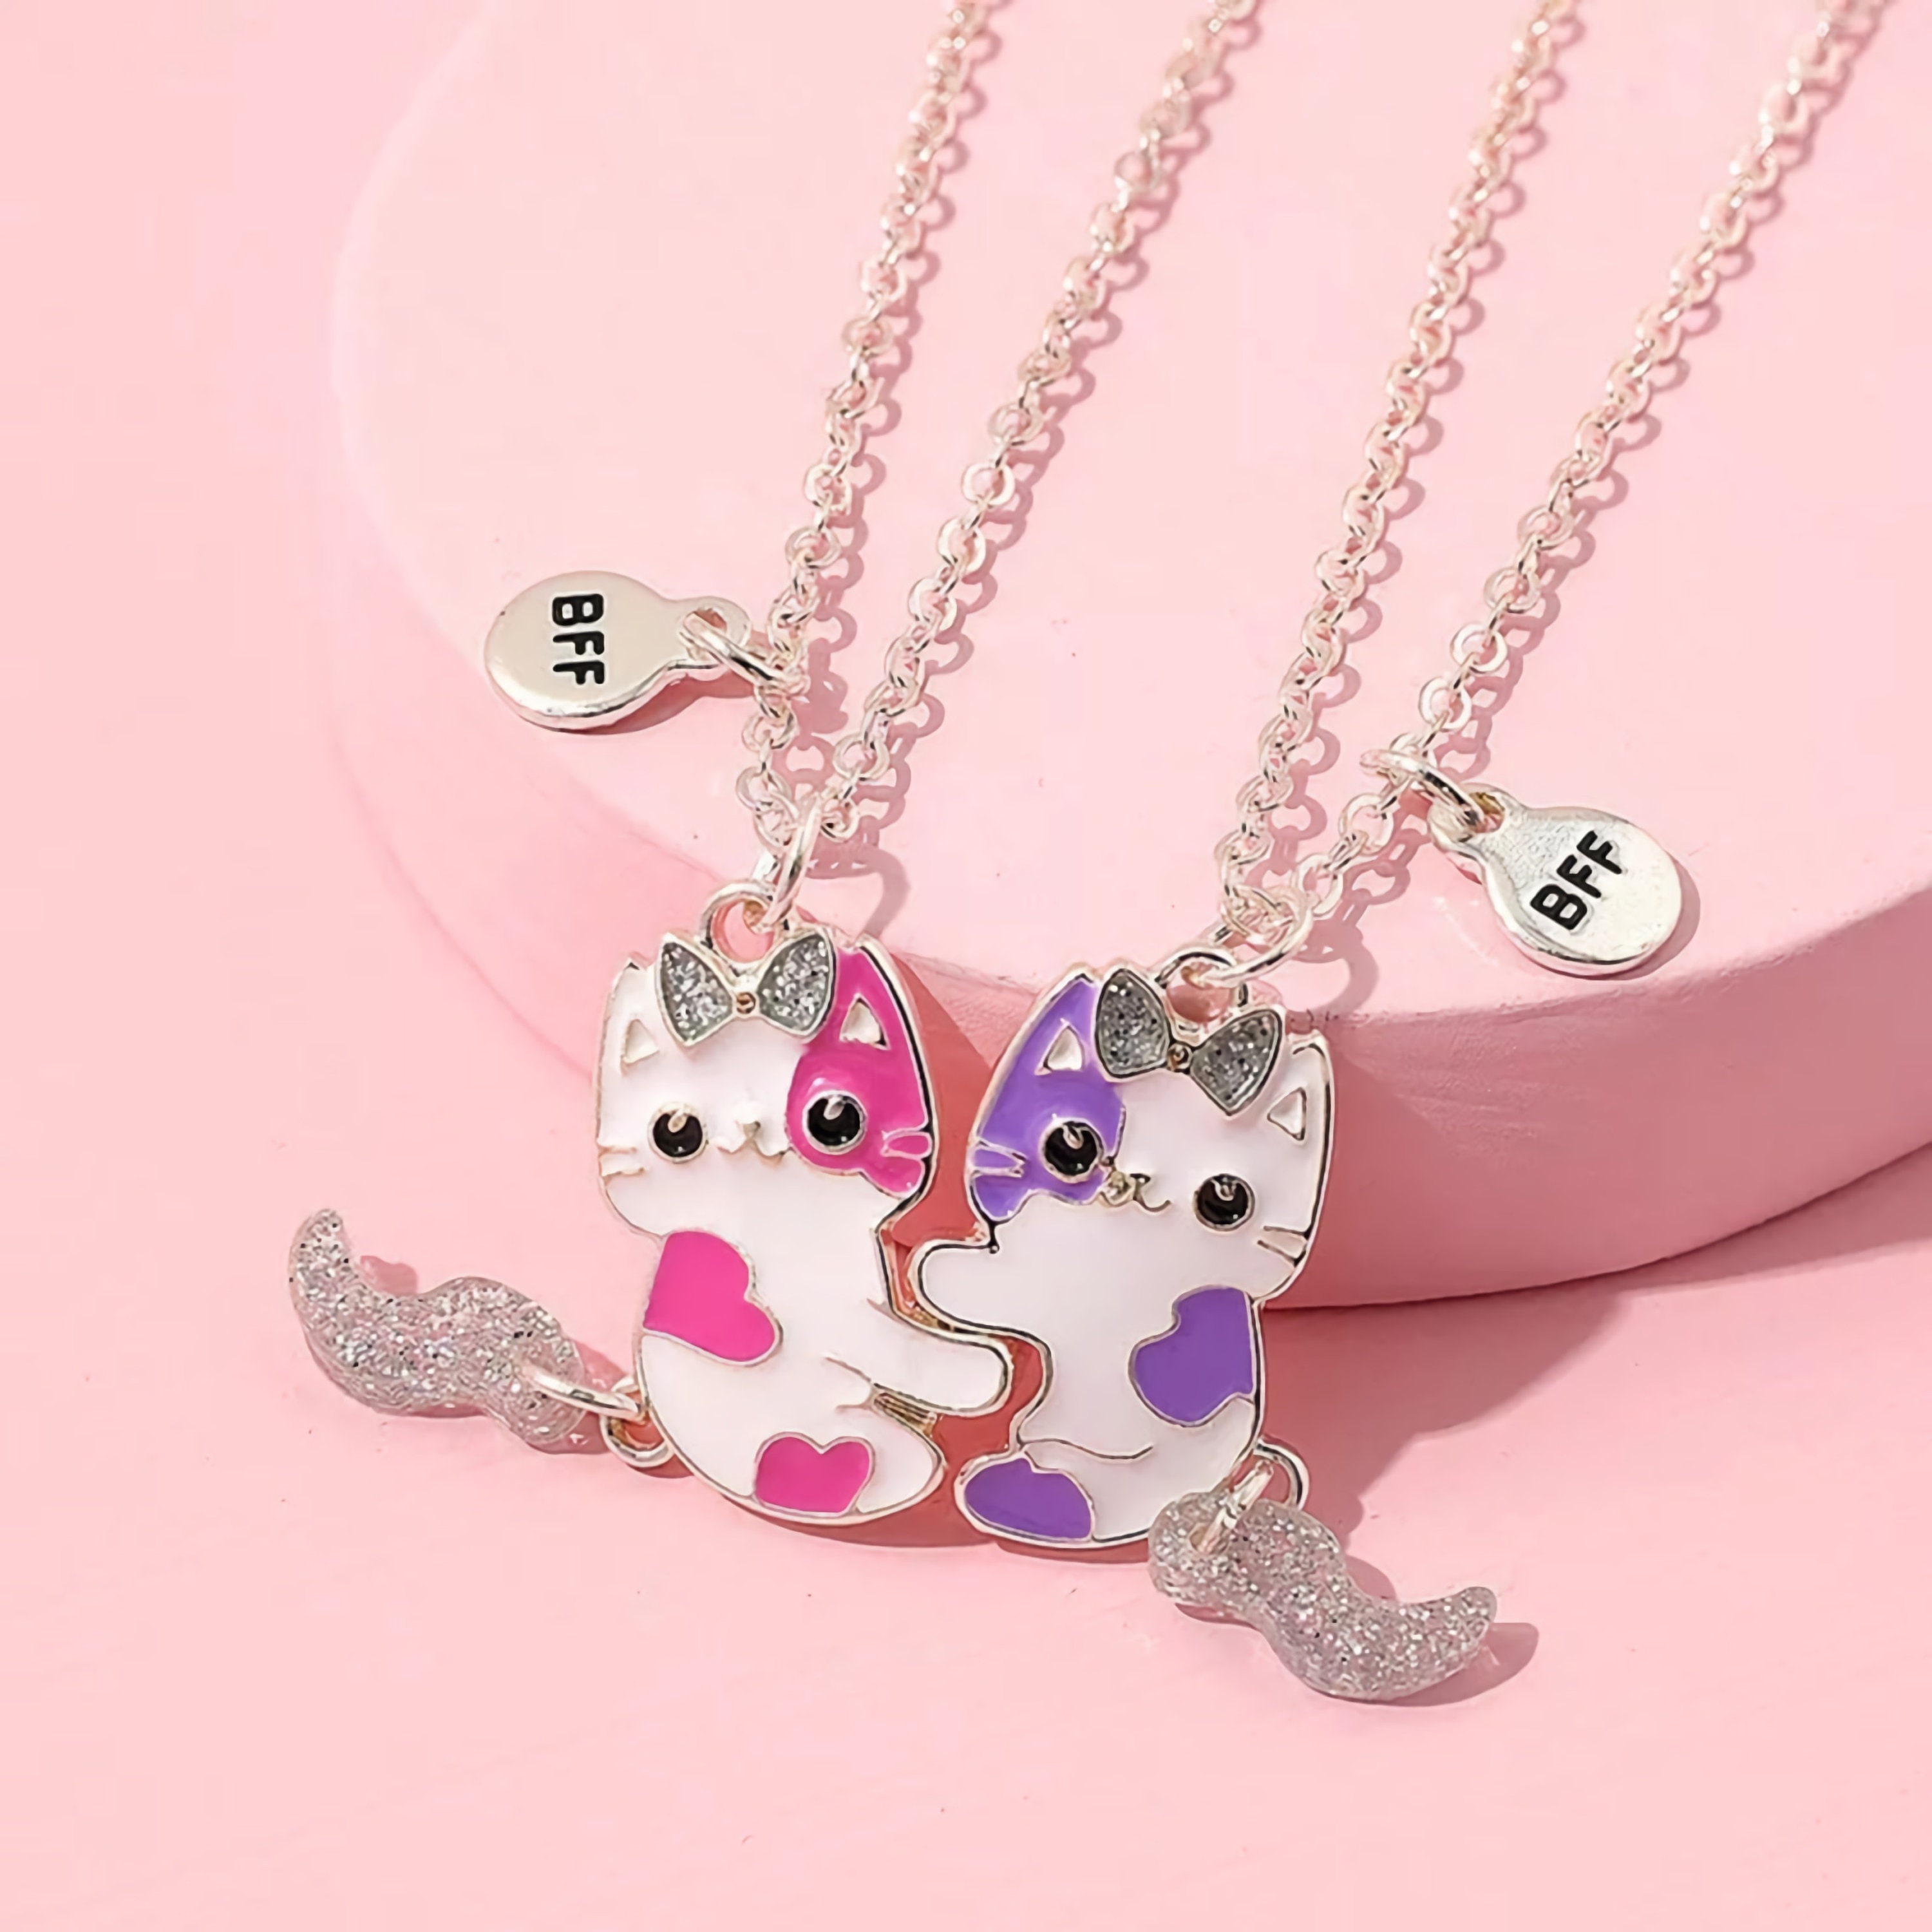 best friend bff necklace for 2| Alibaba.com